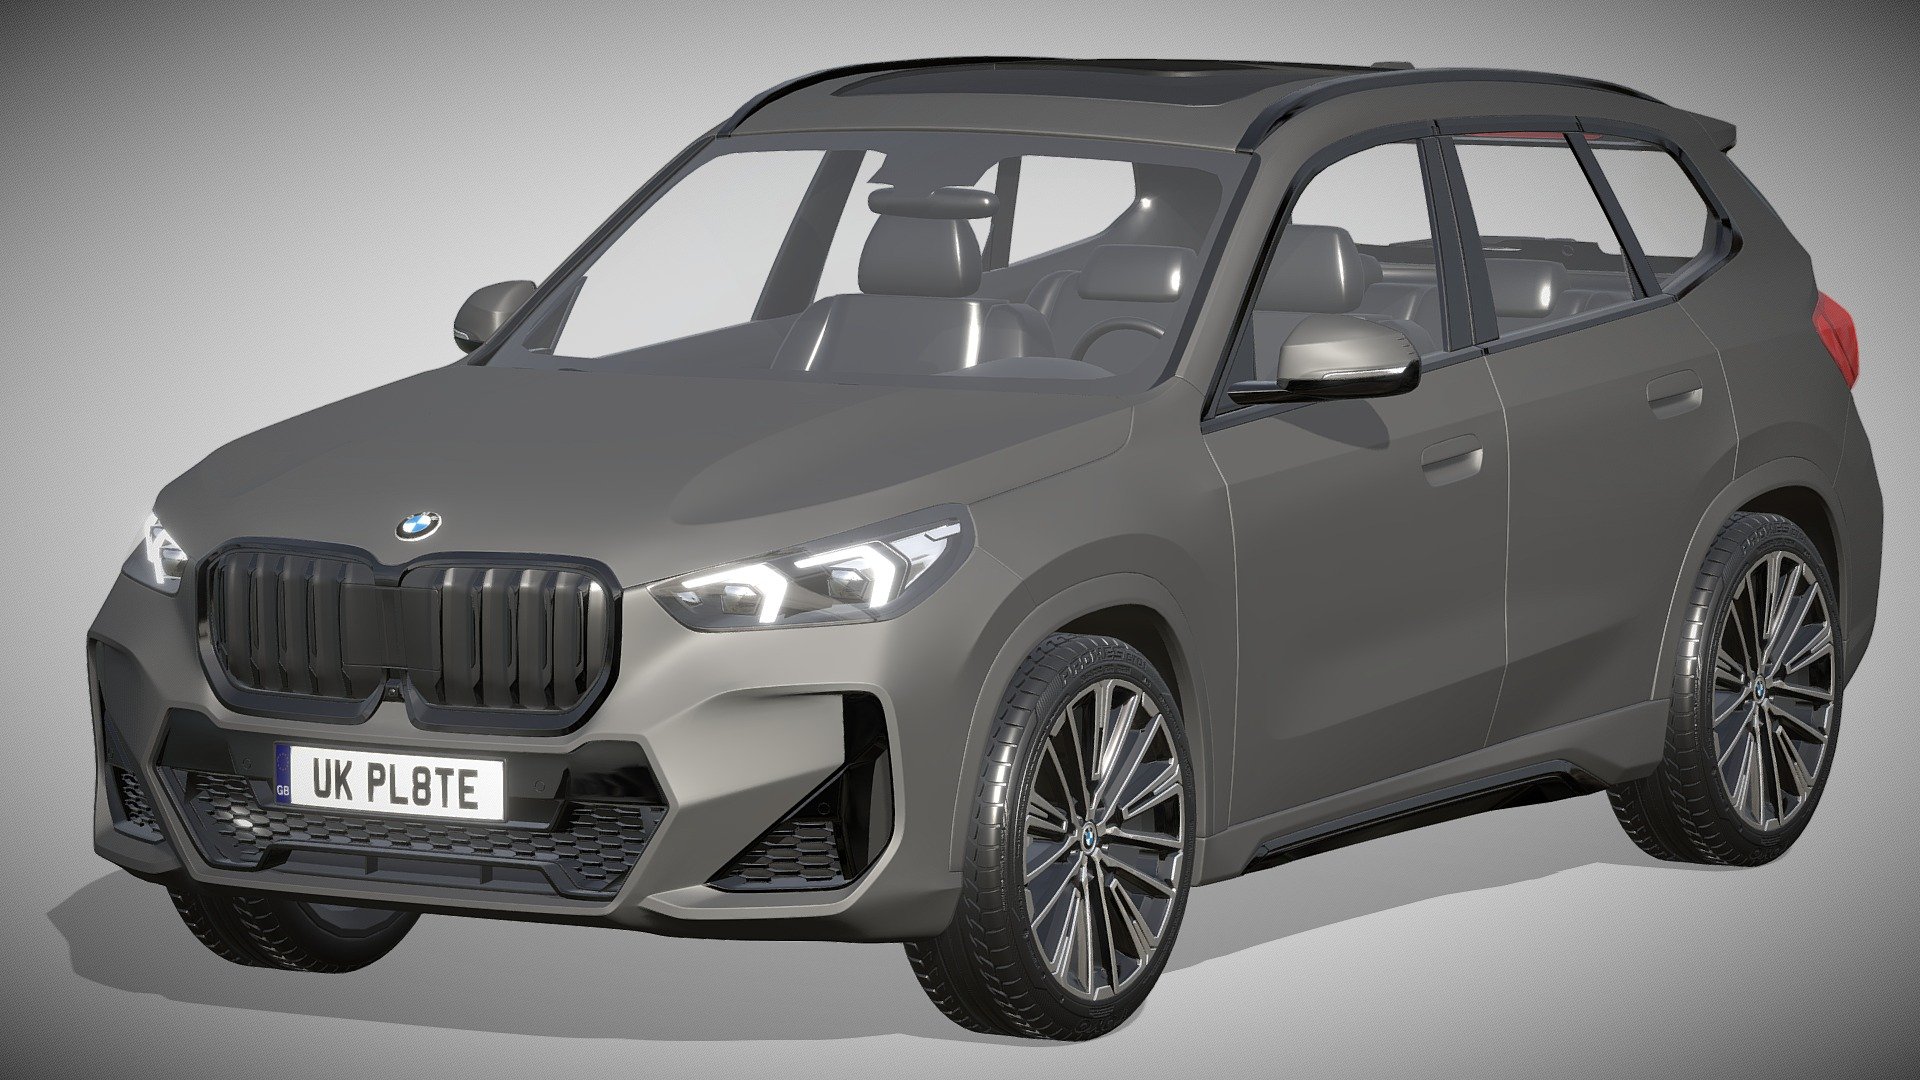 BMW X1 M Sportpaket 2022

https://www.bmw.de/de/neufahrzeuge/x/x1/2022/bmw-x1-ueberblick.html

clean geometry light weight model, yet completely detailed for hi-res renders. use for movies, advertisements or games

Corona render and materials

all textures include in *.rar files

lighting setup is not included in the file! - BMW X1 M Sportpaket 2022 - Buy Royalty Free 3D model by zifir3d 3d model